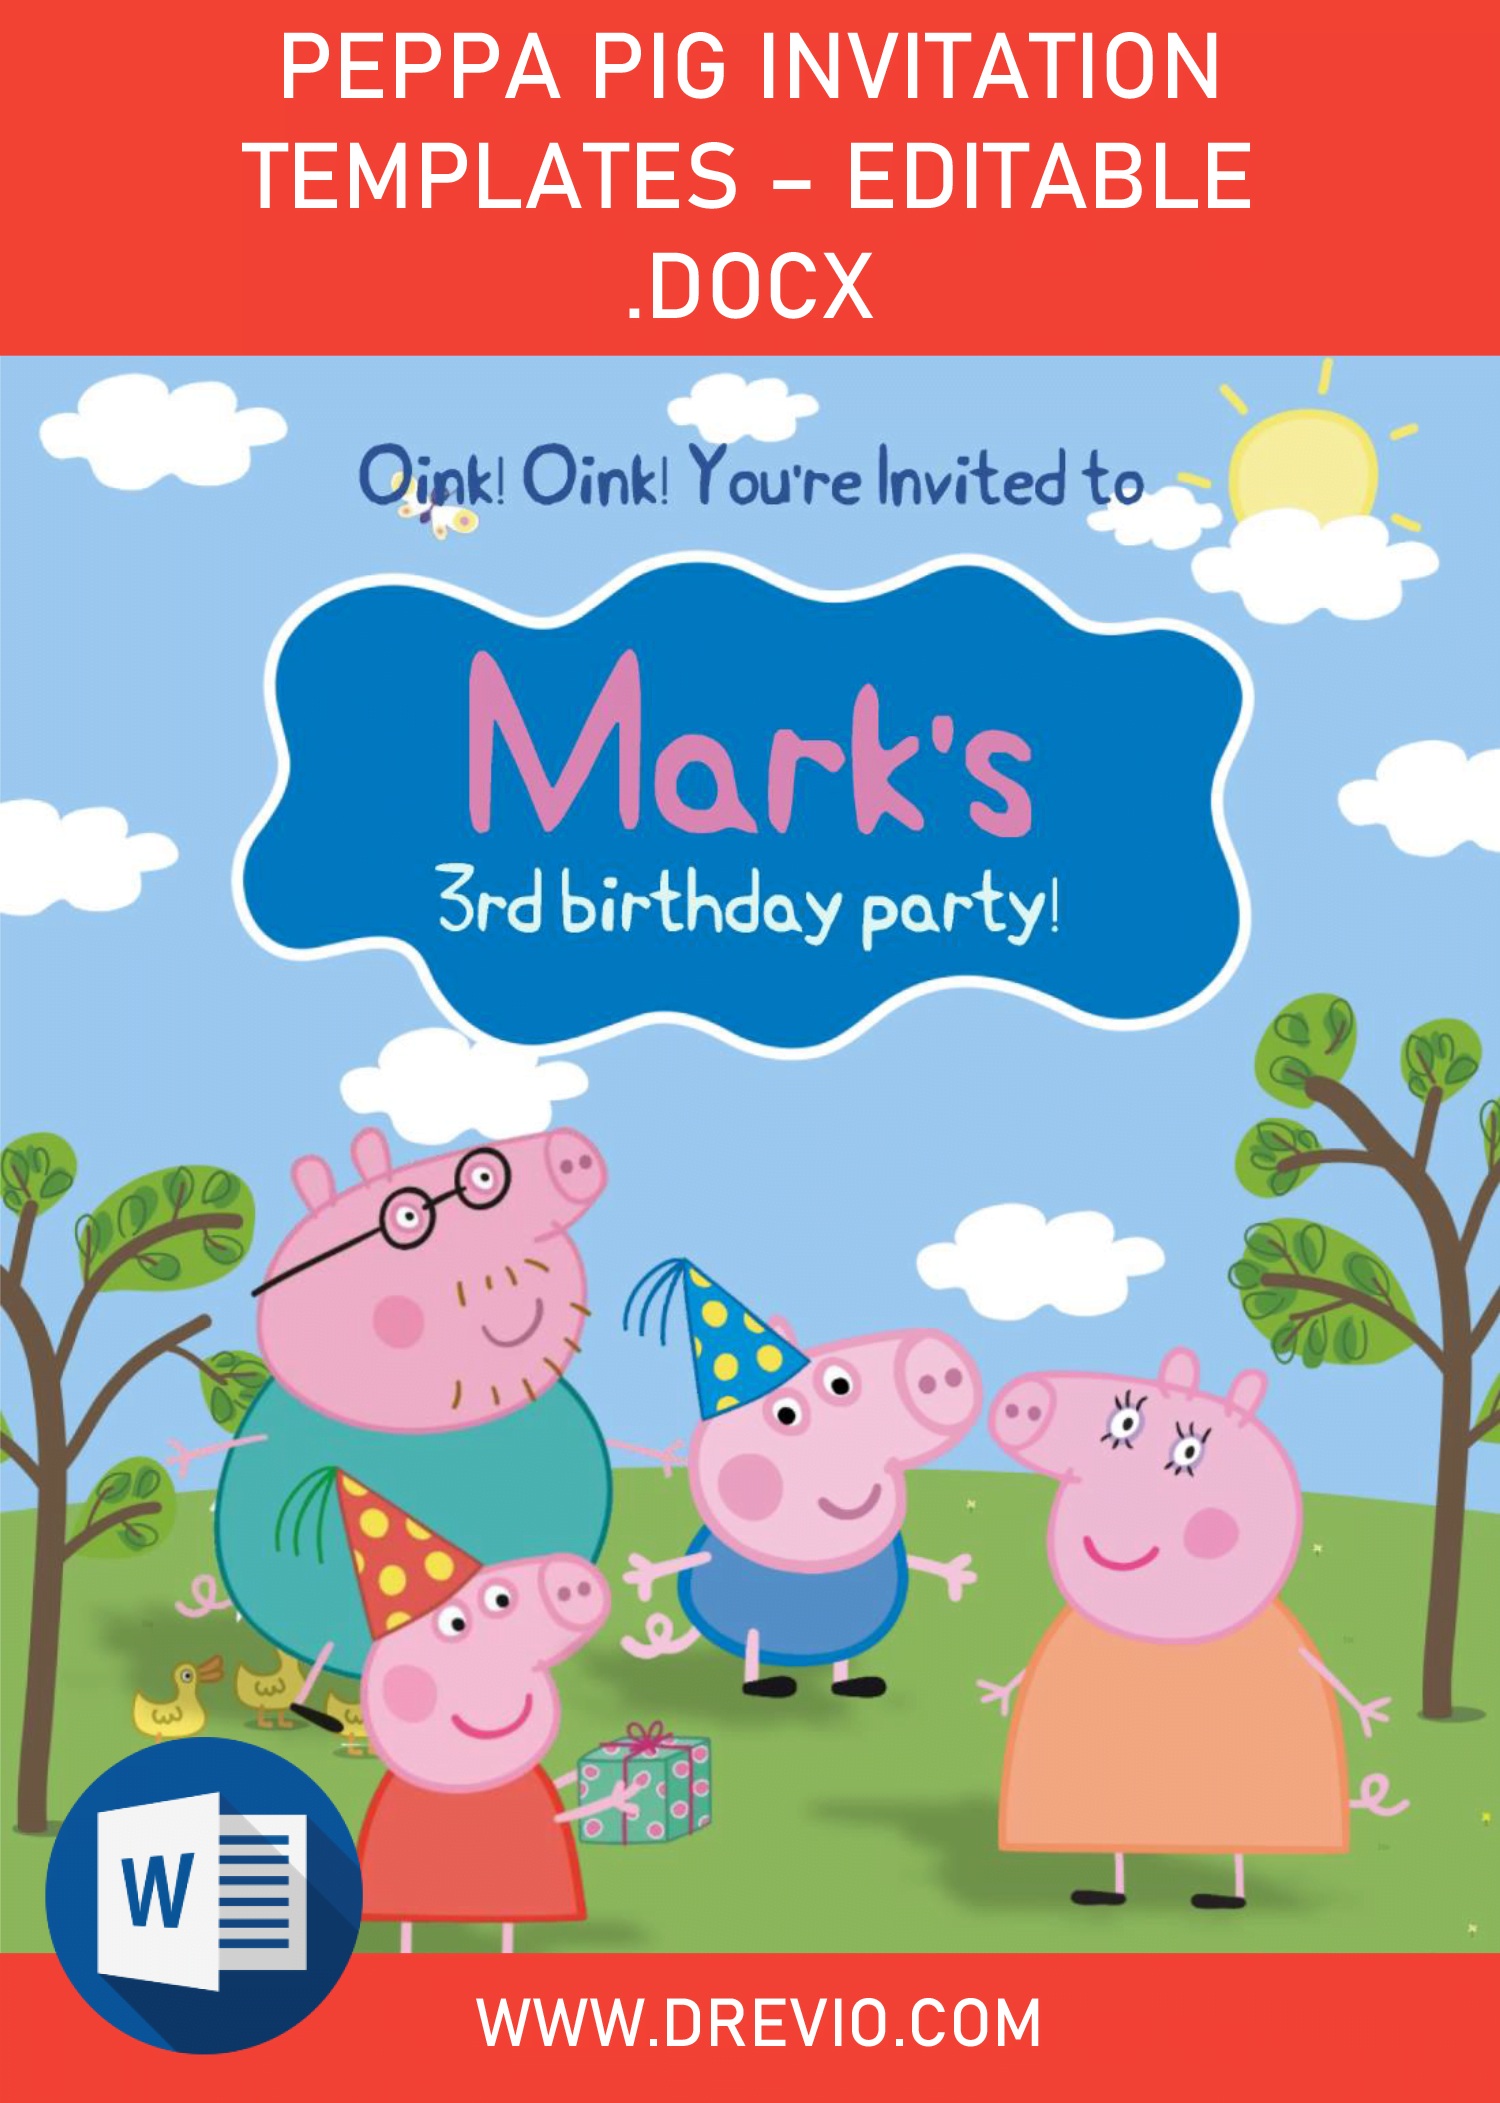 peppa-pig-invitations-g-cover-download-hundreds-free-printable